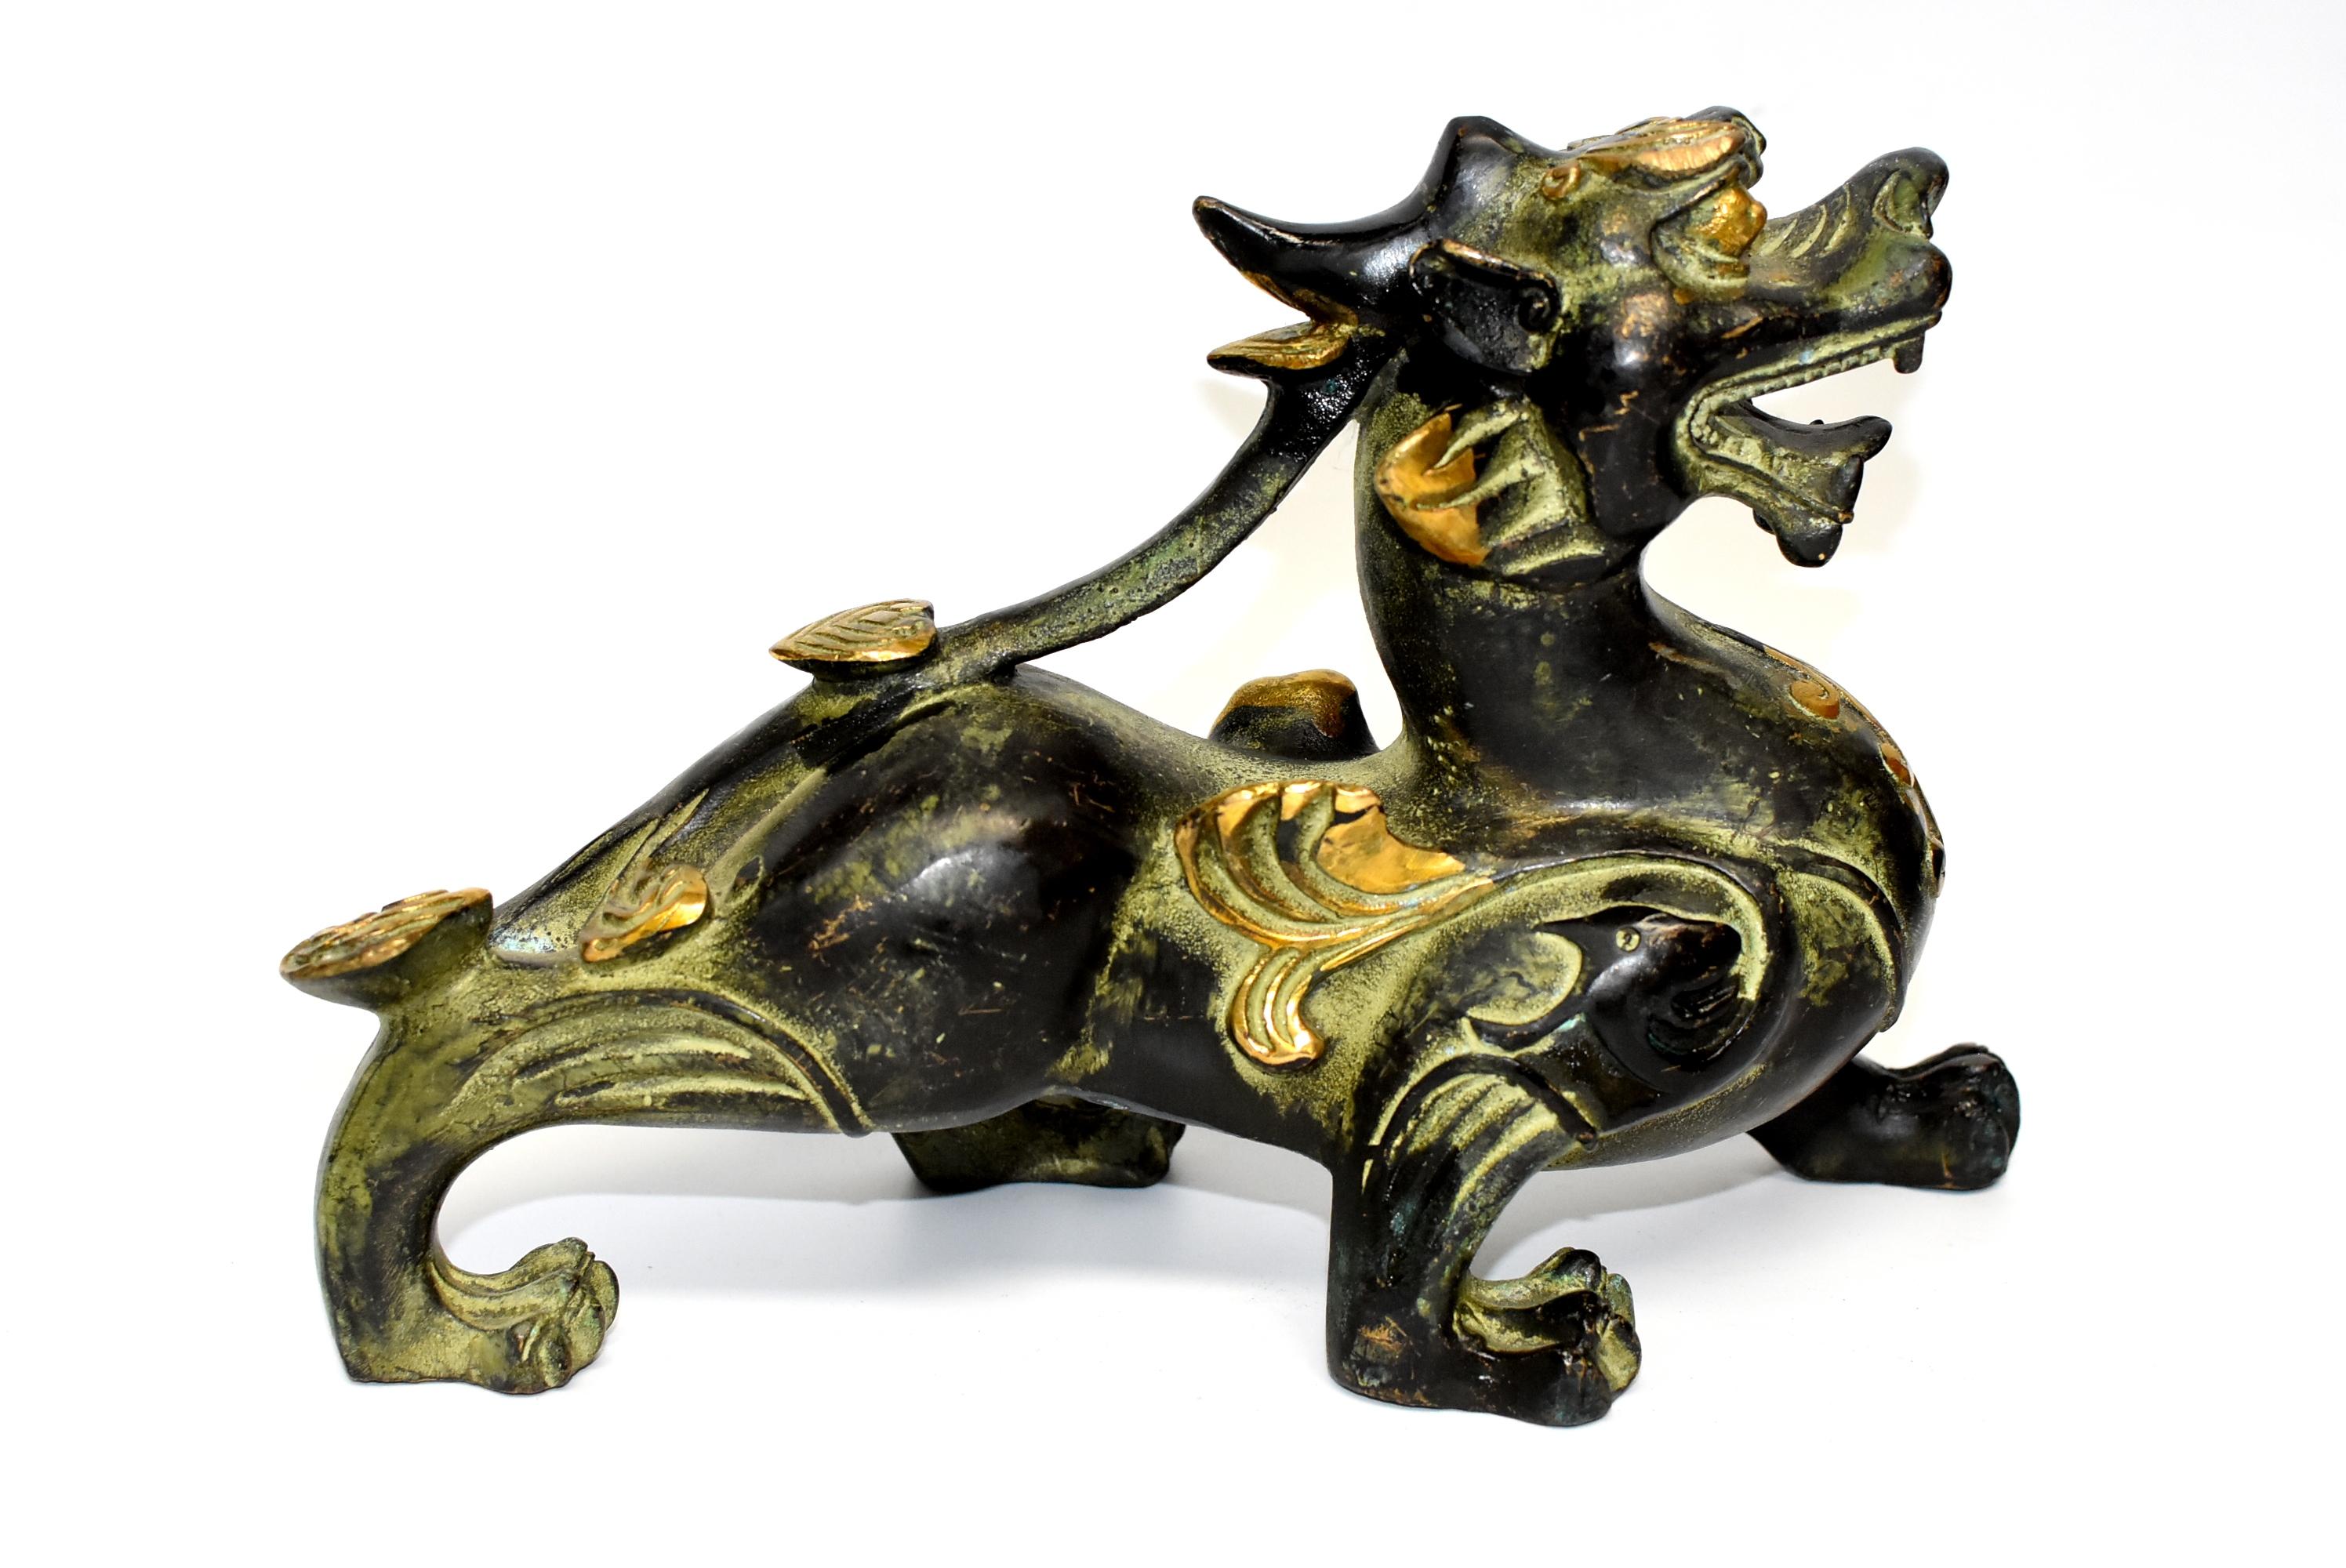 A pair of large, hefty bronze Pi Xiu statues. These mythical animals are the Chinese treasured money beast who is believed to bring and hold wealth. Beautiful gilding highlights the beasts, giving them a fantastic auspicious glow. Besides being a